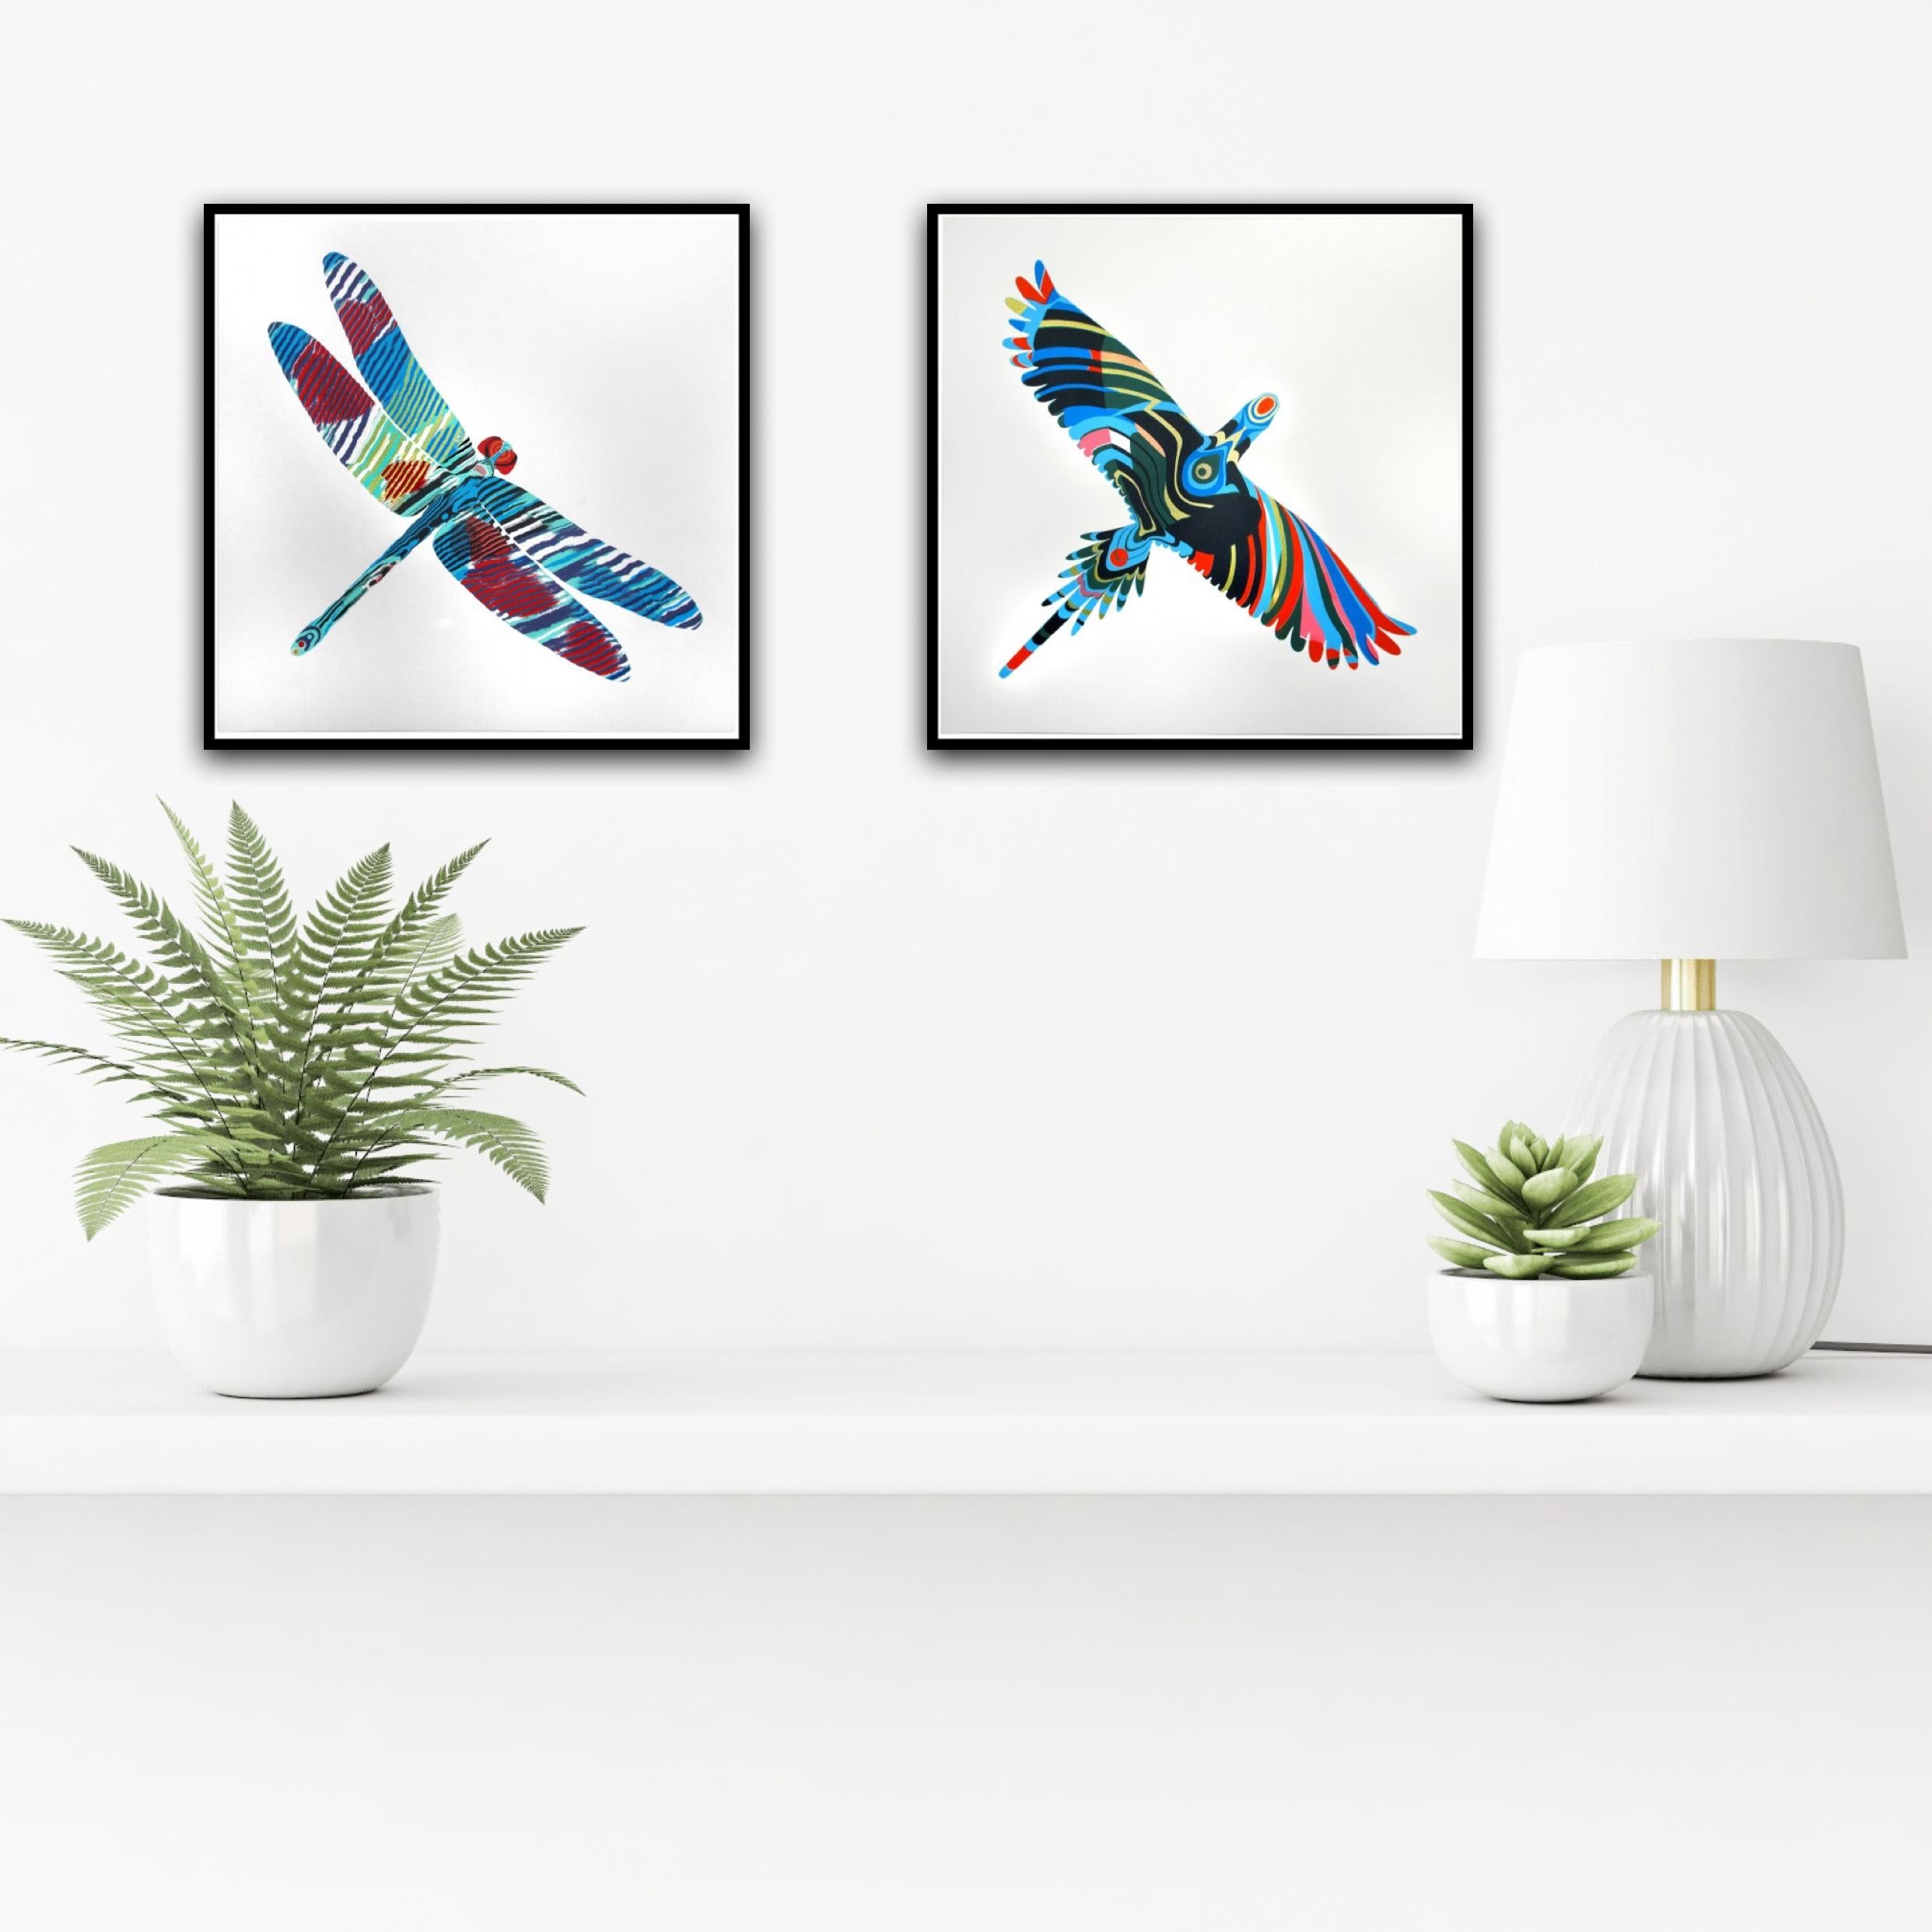 The Gift of Flight and Dragonfly - Print by Chris Keegan